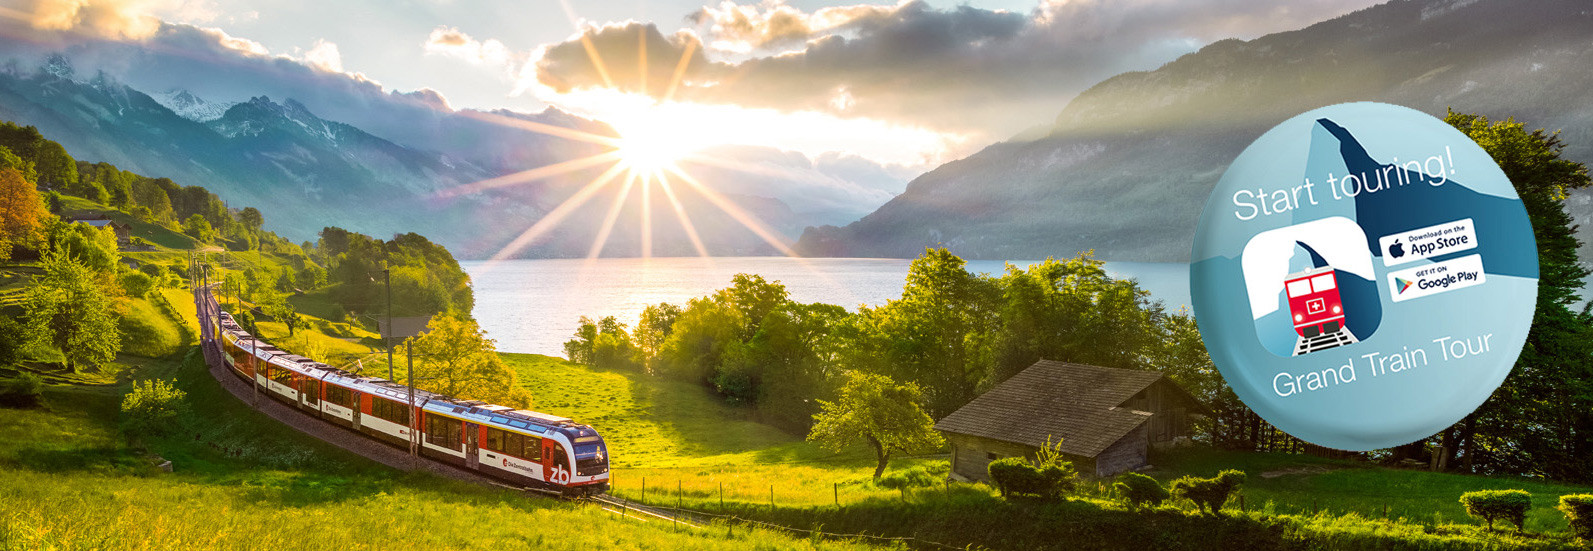 Experience the most beautiful sides of Switzerland by train and boat.